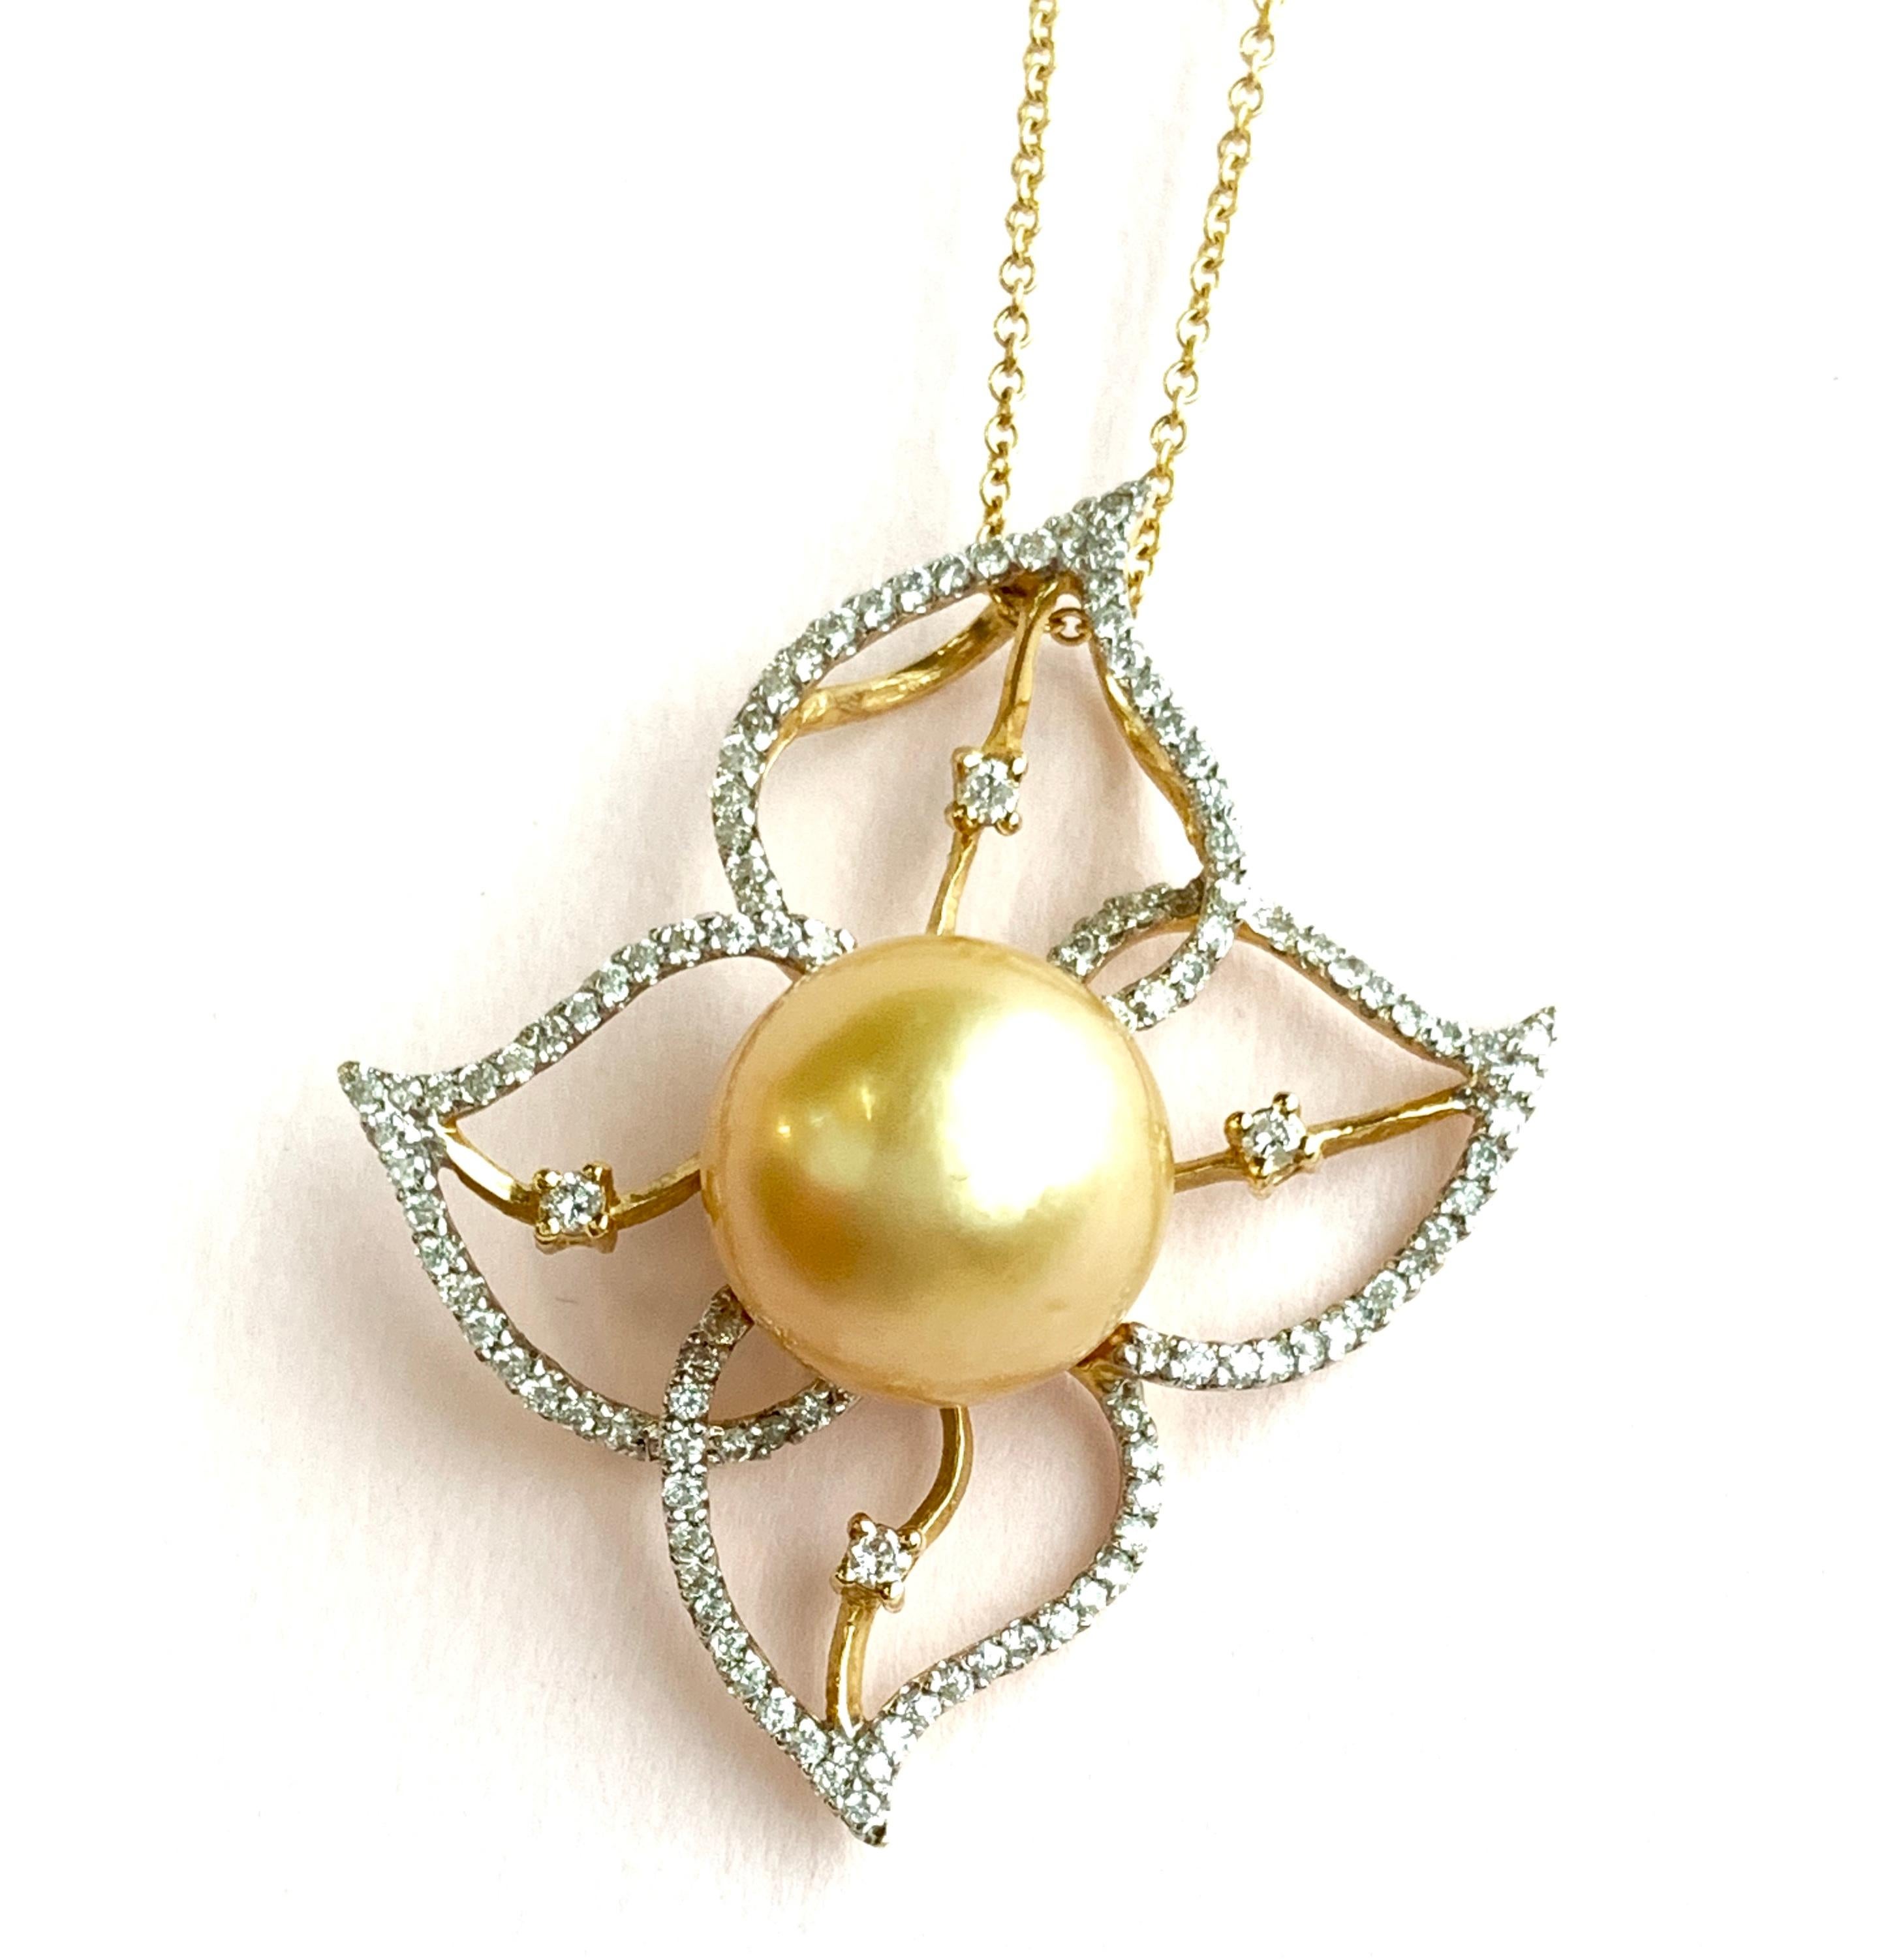 This beautiful and fun piece features a colored pearl center stone surrounded by petals of dazzling diamonds totaling 0.52 carats. Perfect for the summer and a great addition to any collection!

Material: 18K Yellow Gold
Center Stone Details: 1